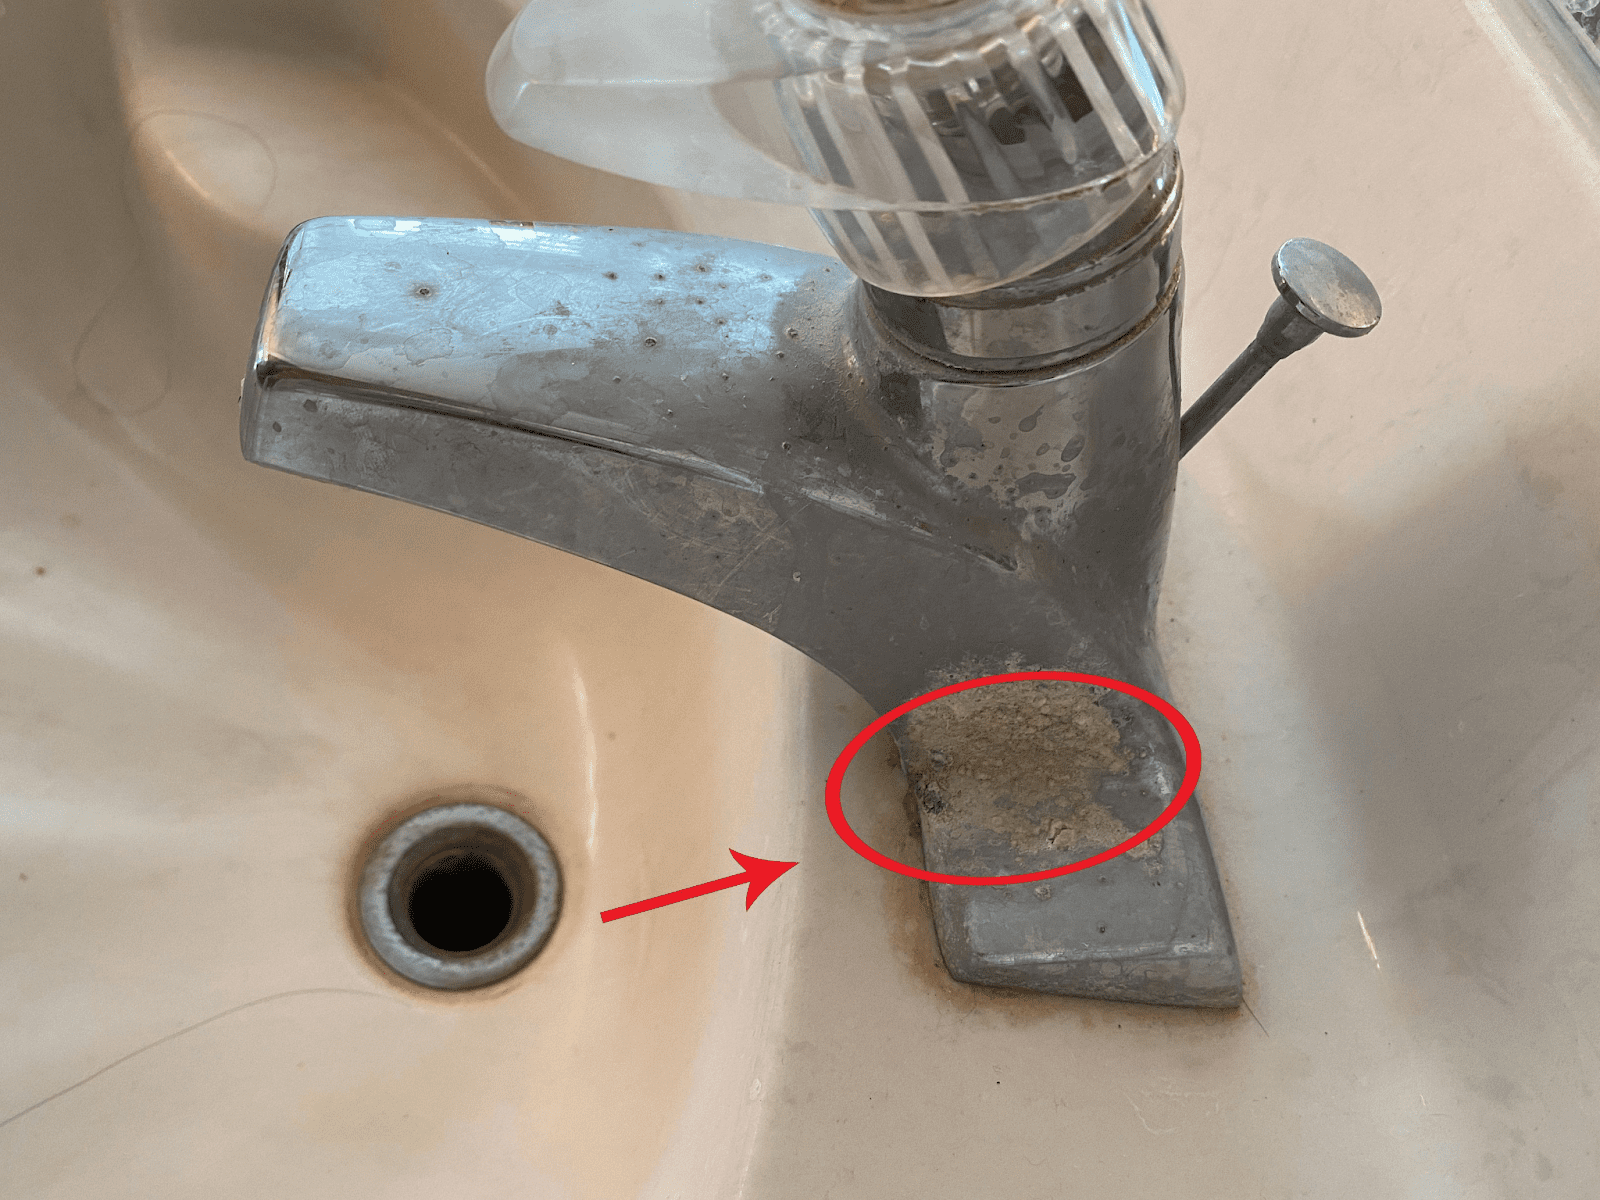 How to Remove Green Buildup on Faucet? [Methods Explained]